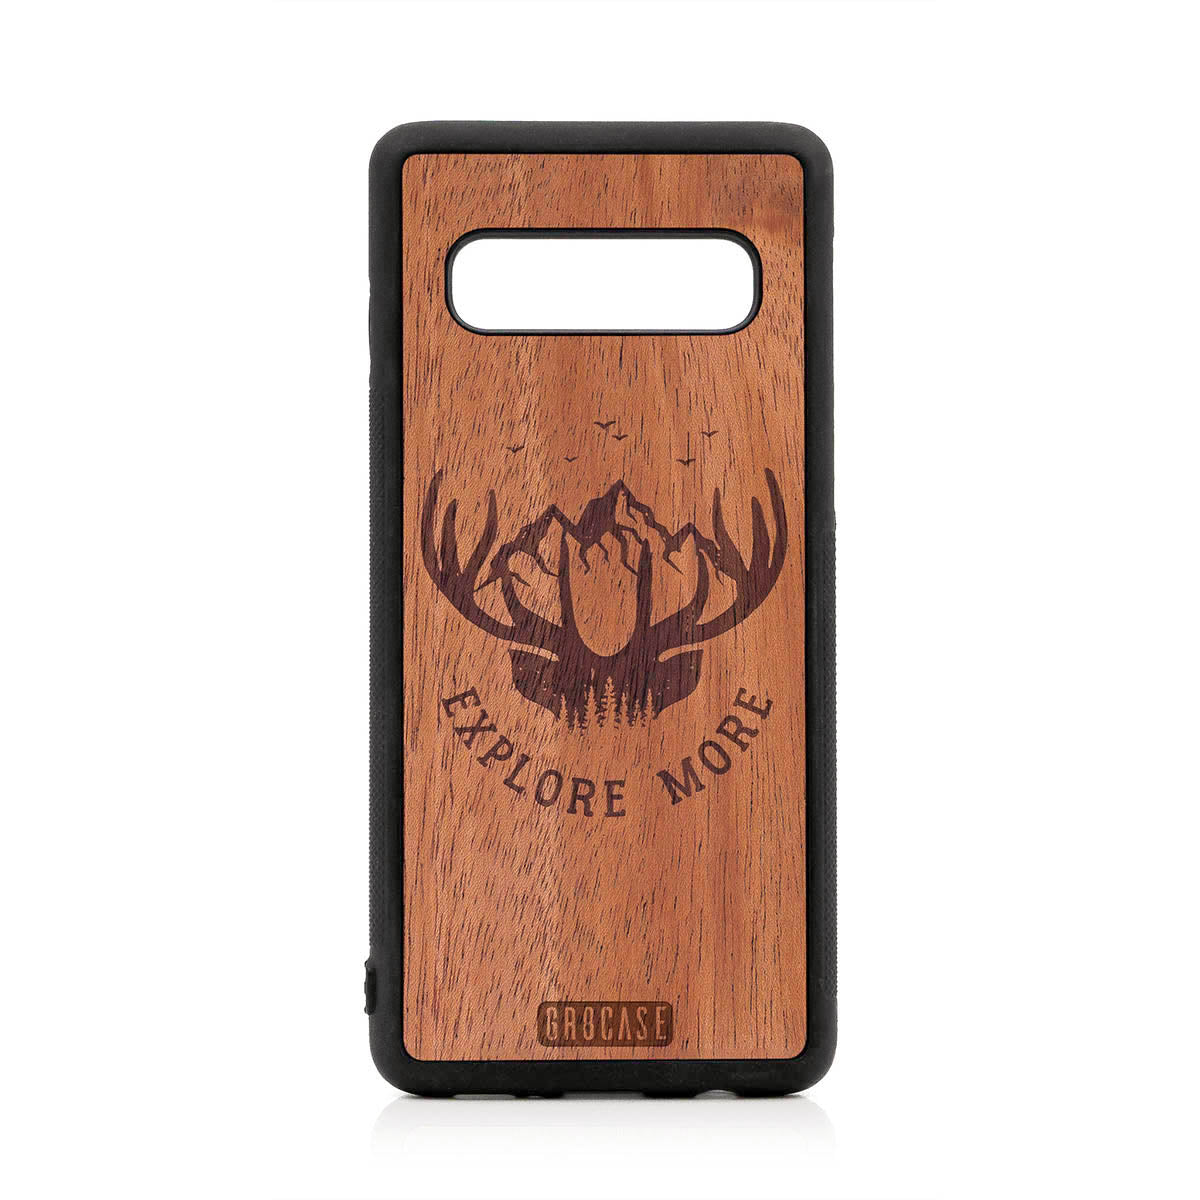 Explore More (Forest, Mountains & Antlers) Design Wood Case For Samsung Galaxy S10 by GR8CASE